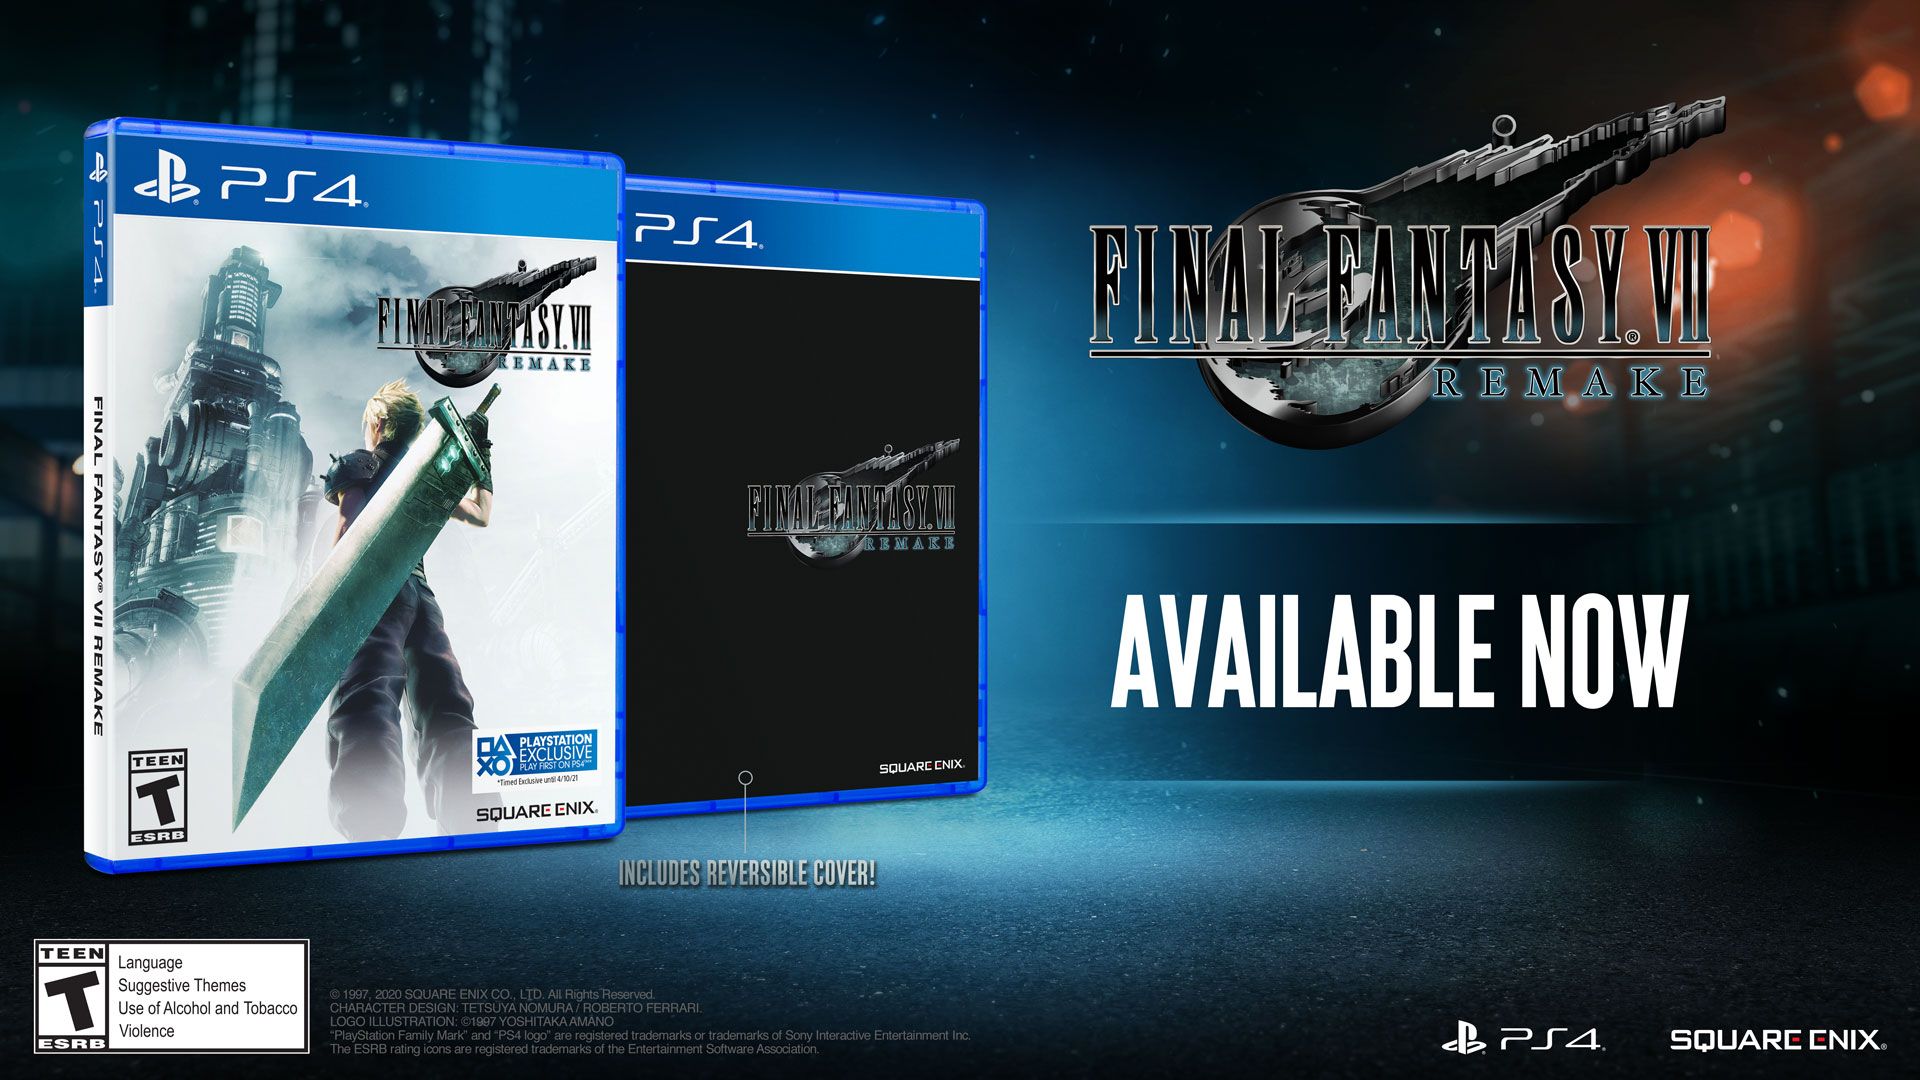 ff7 ps4 store